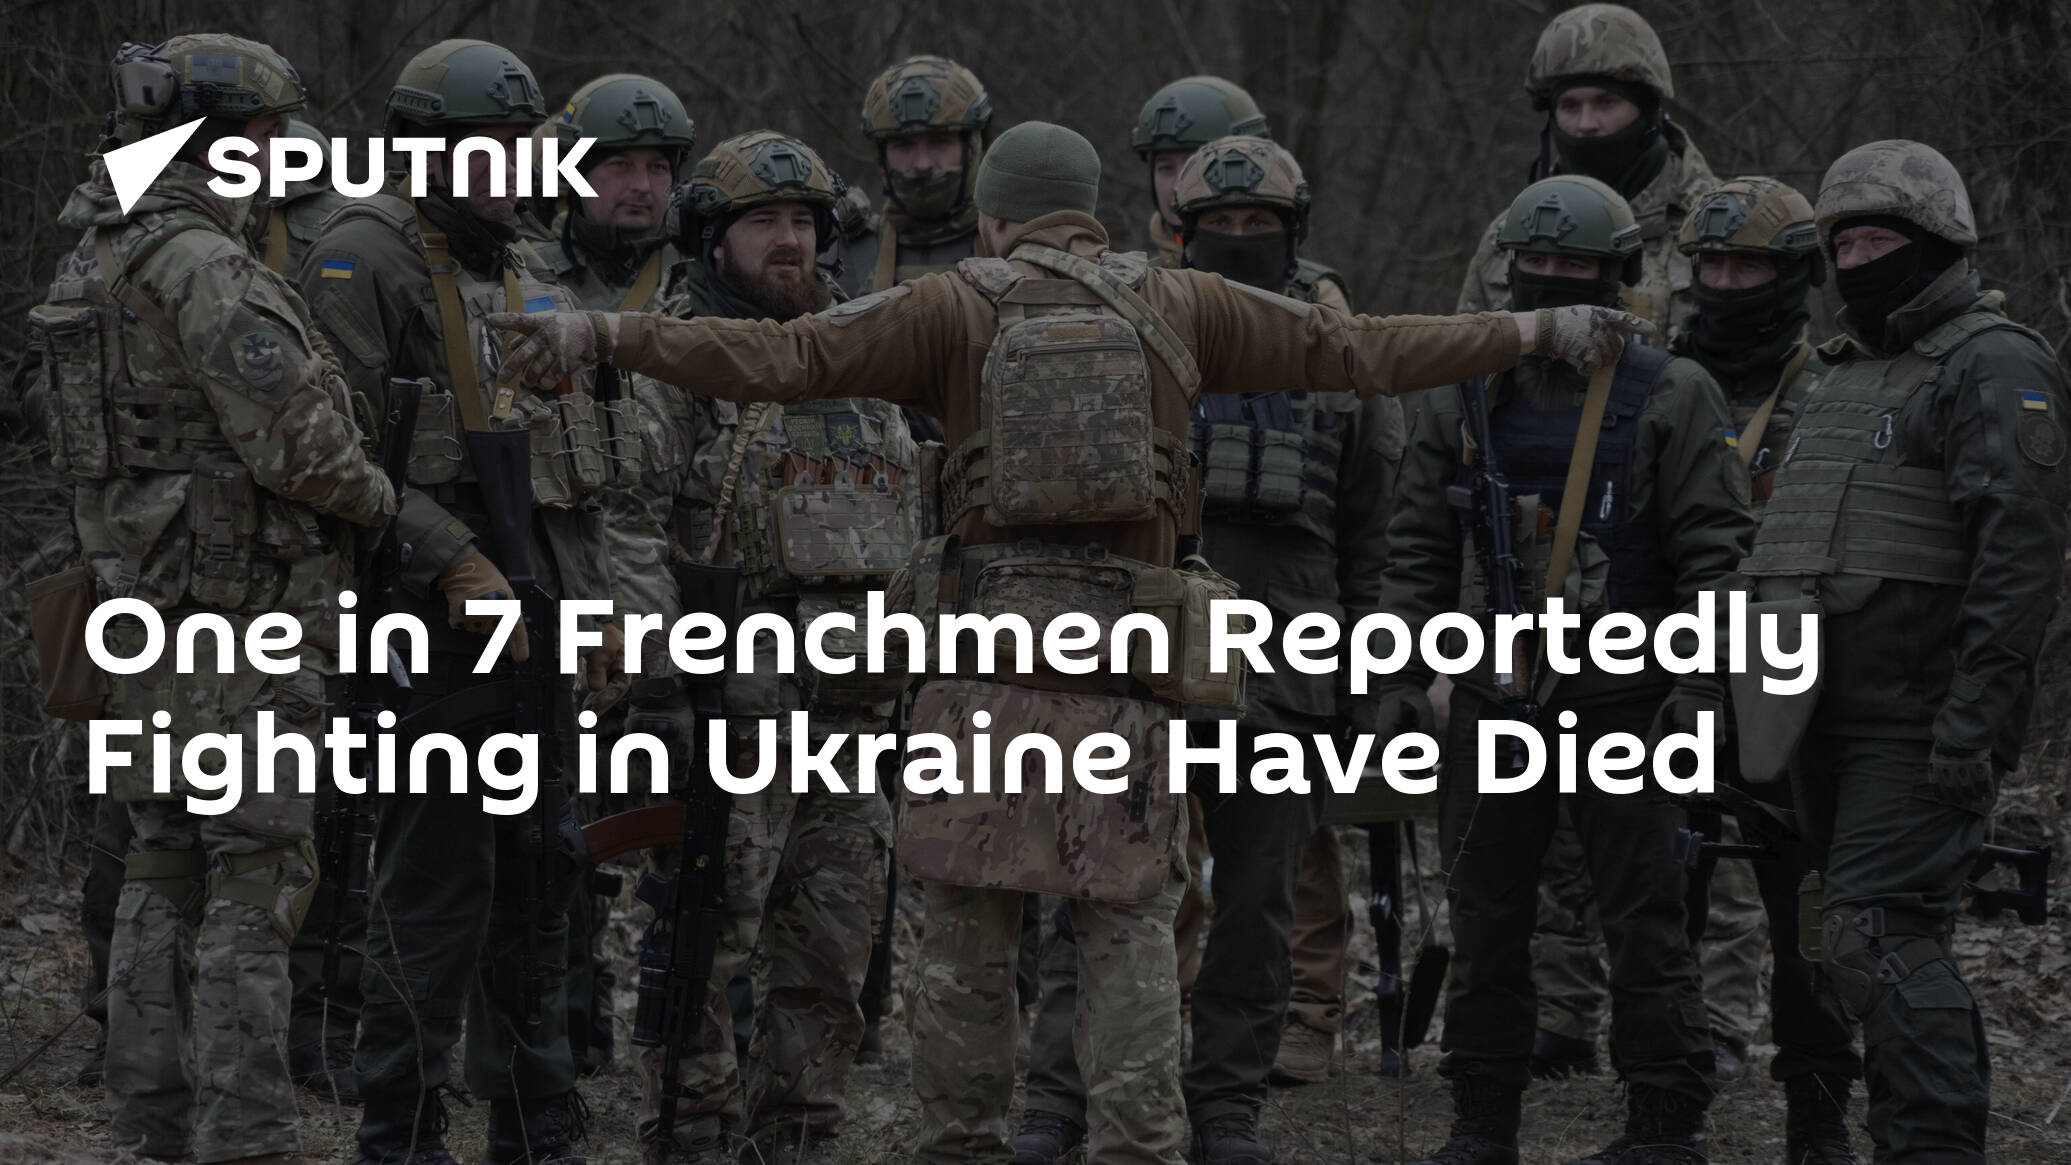 One in 7 Frenchmen Reportedly Fighting in Ukraine Have Died